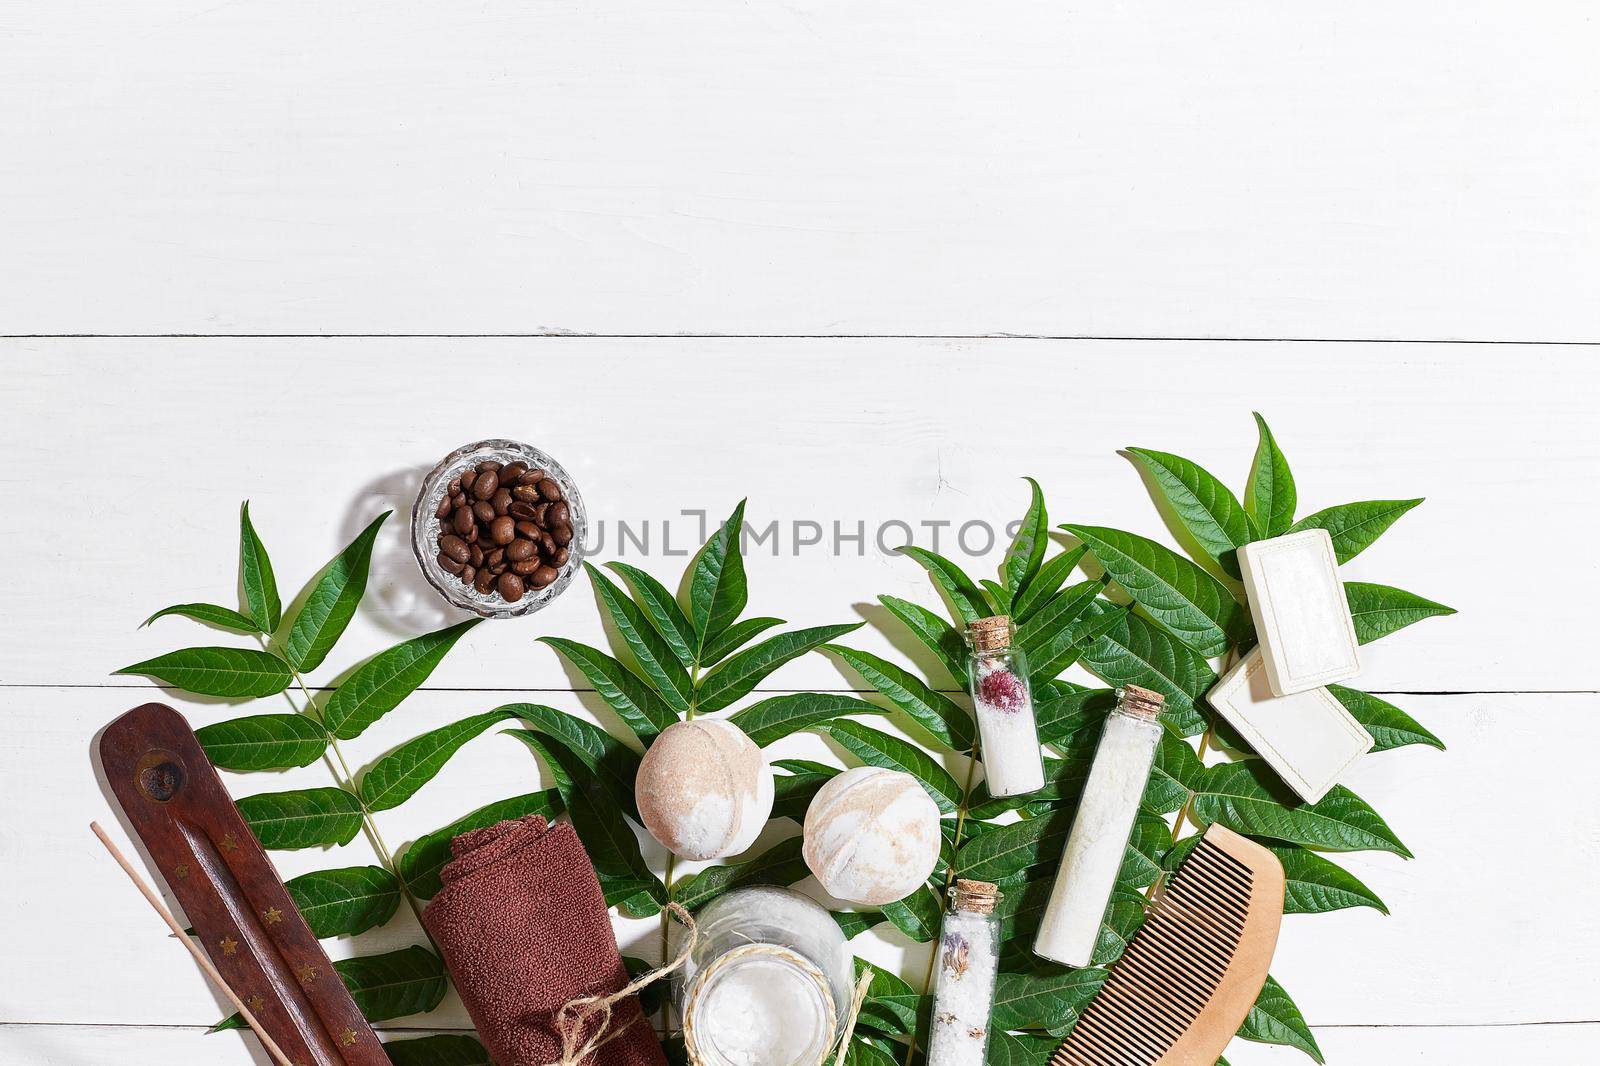 Natural spa and aromatherapy skincare beauty products with bathroom accessories including exfoliating scrubs, oils, sponges, bath bombs and soaps. Top view. Copy space. Still life. flat lay